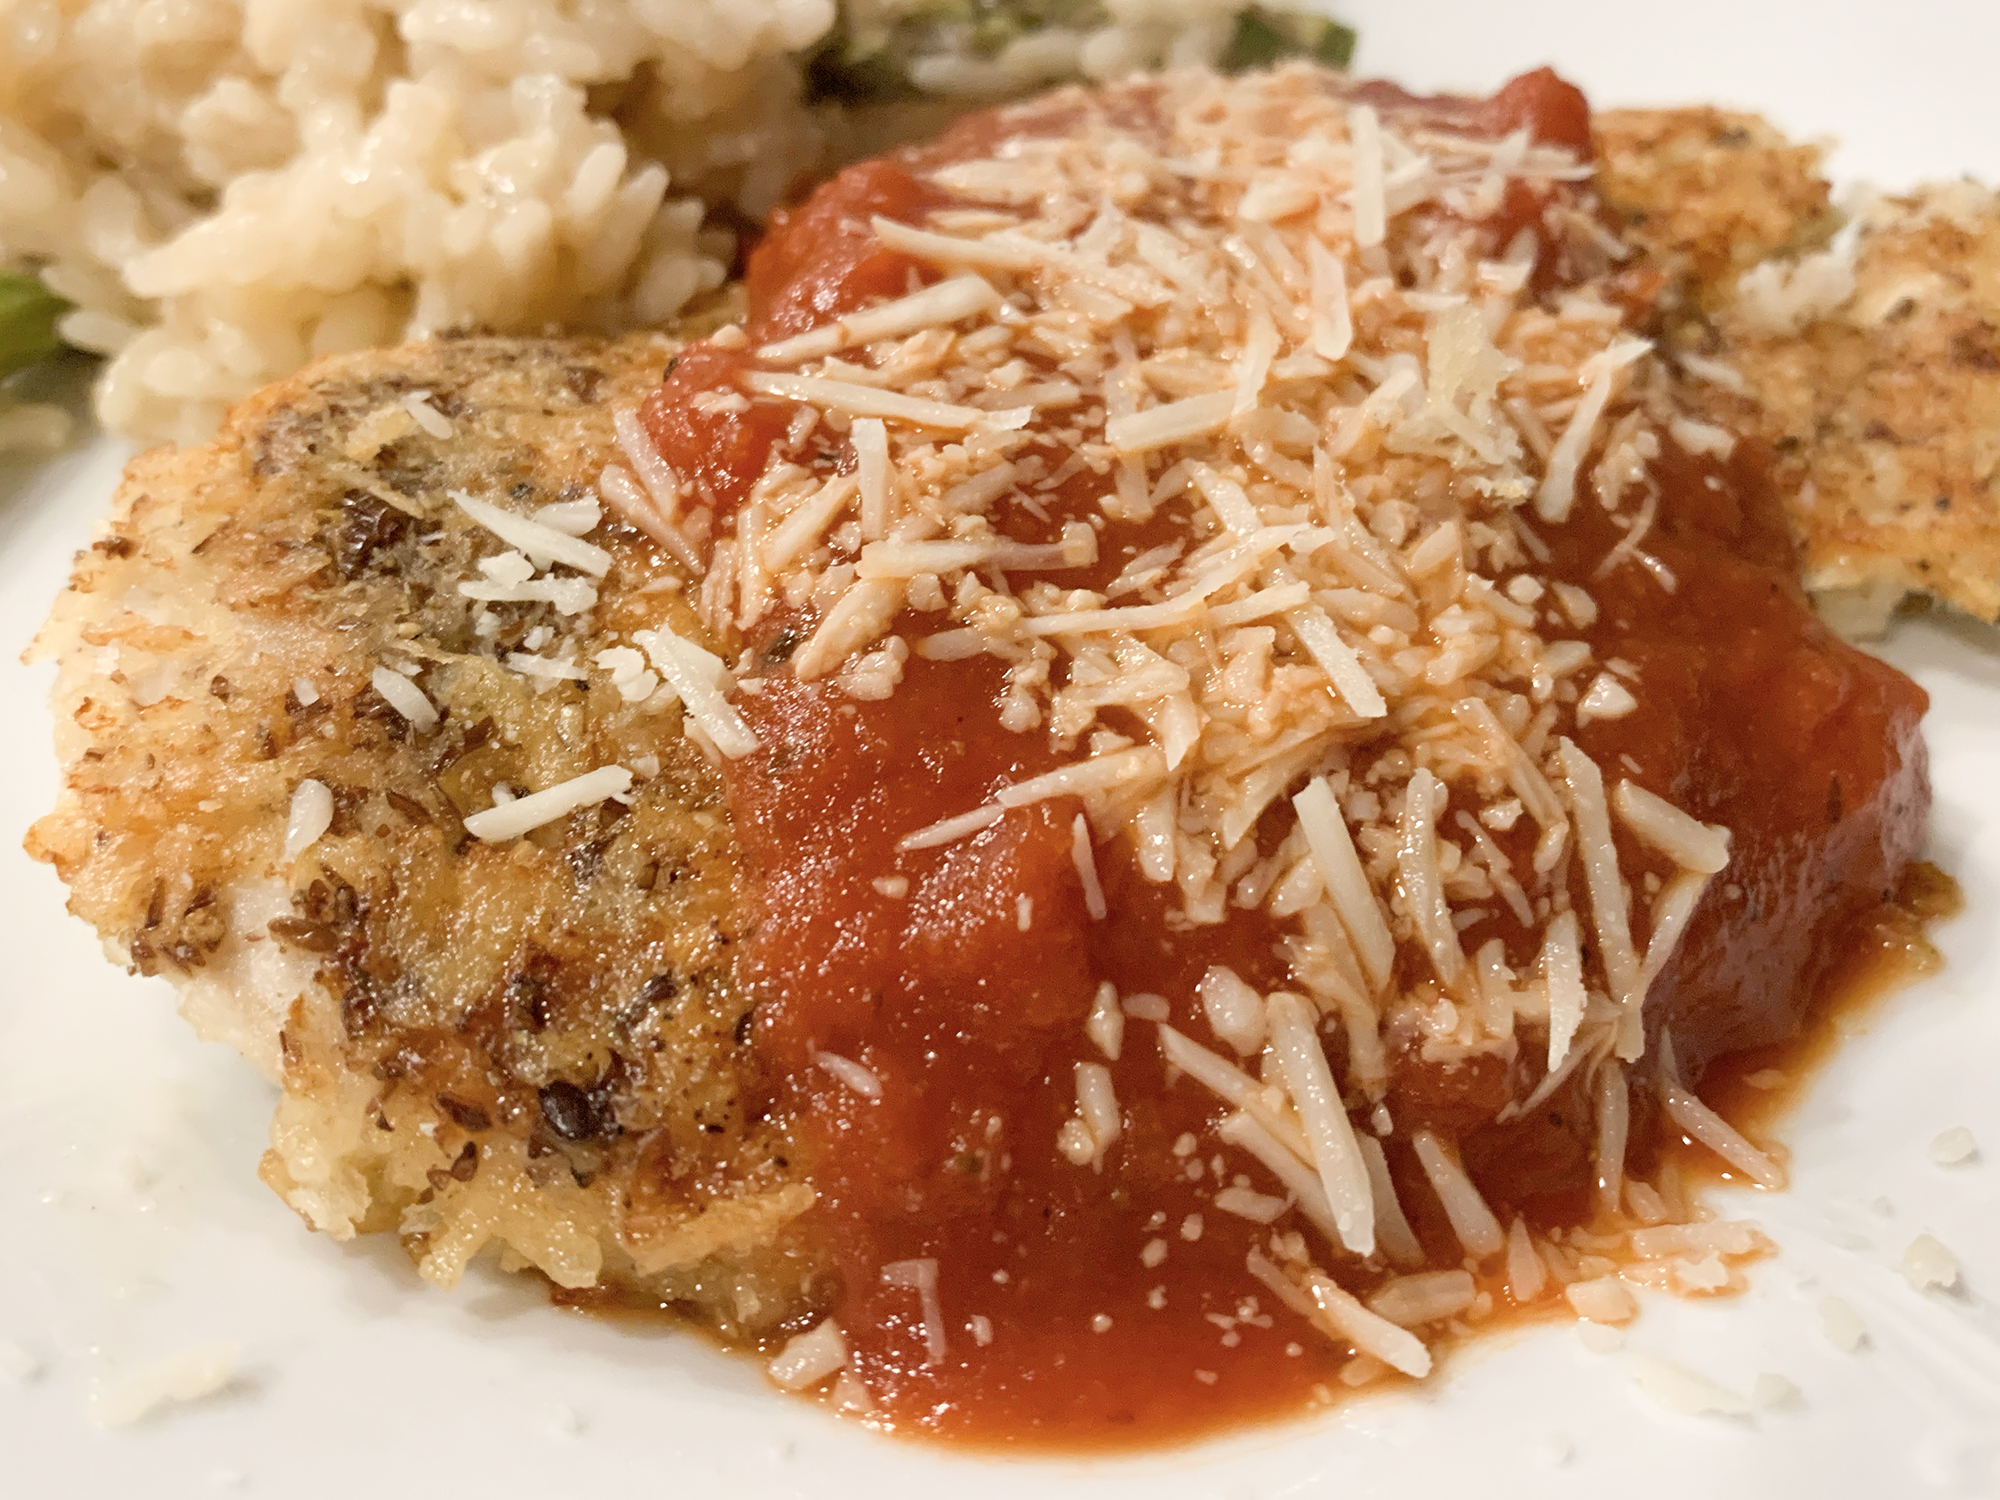 close up view of Homemade Chicken Parmigiana garnished with red sauce and cheese, served with rice on a plate